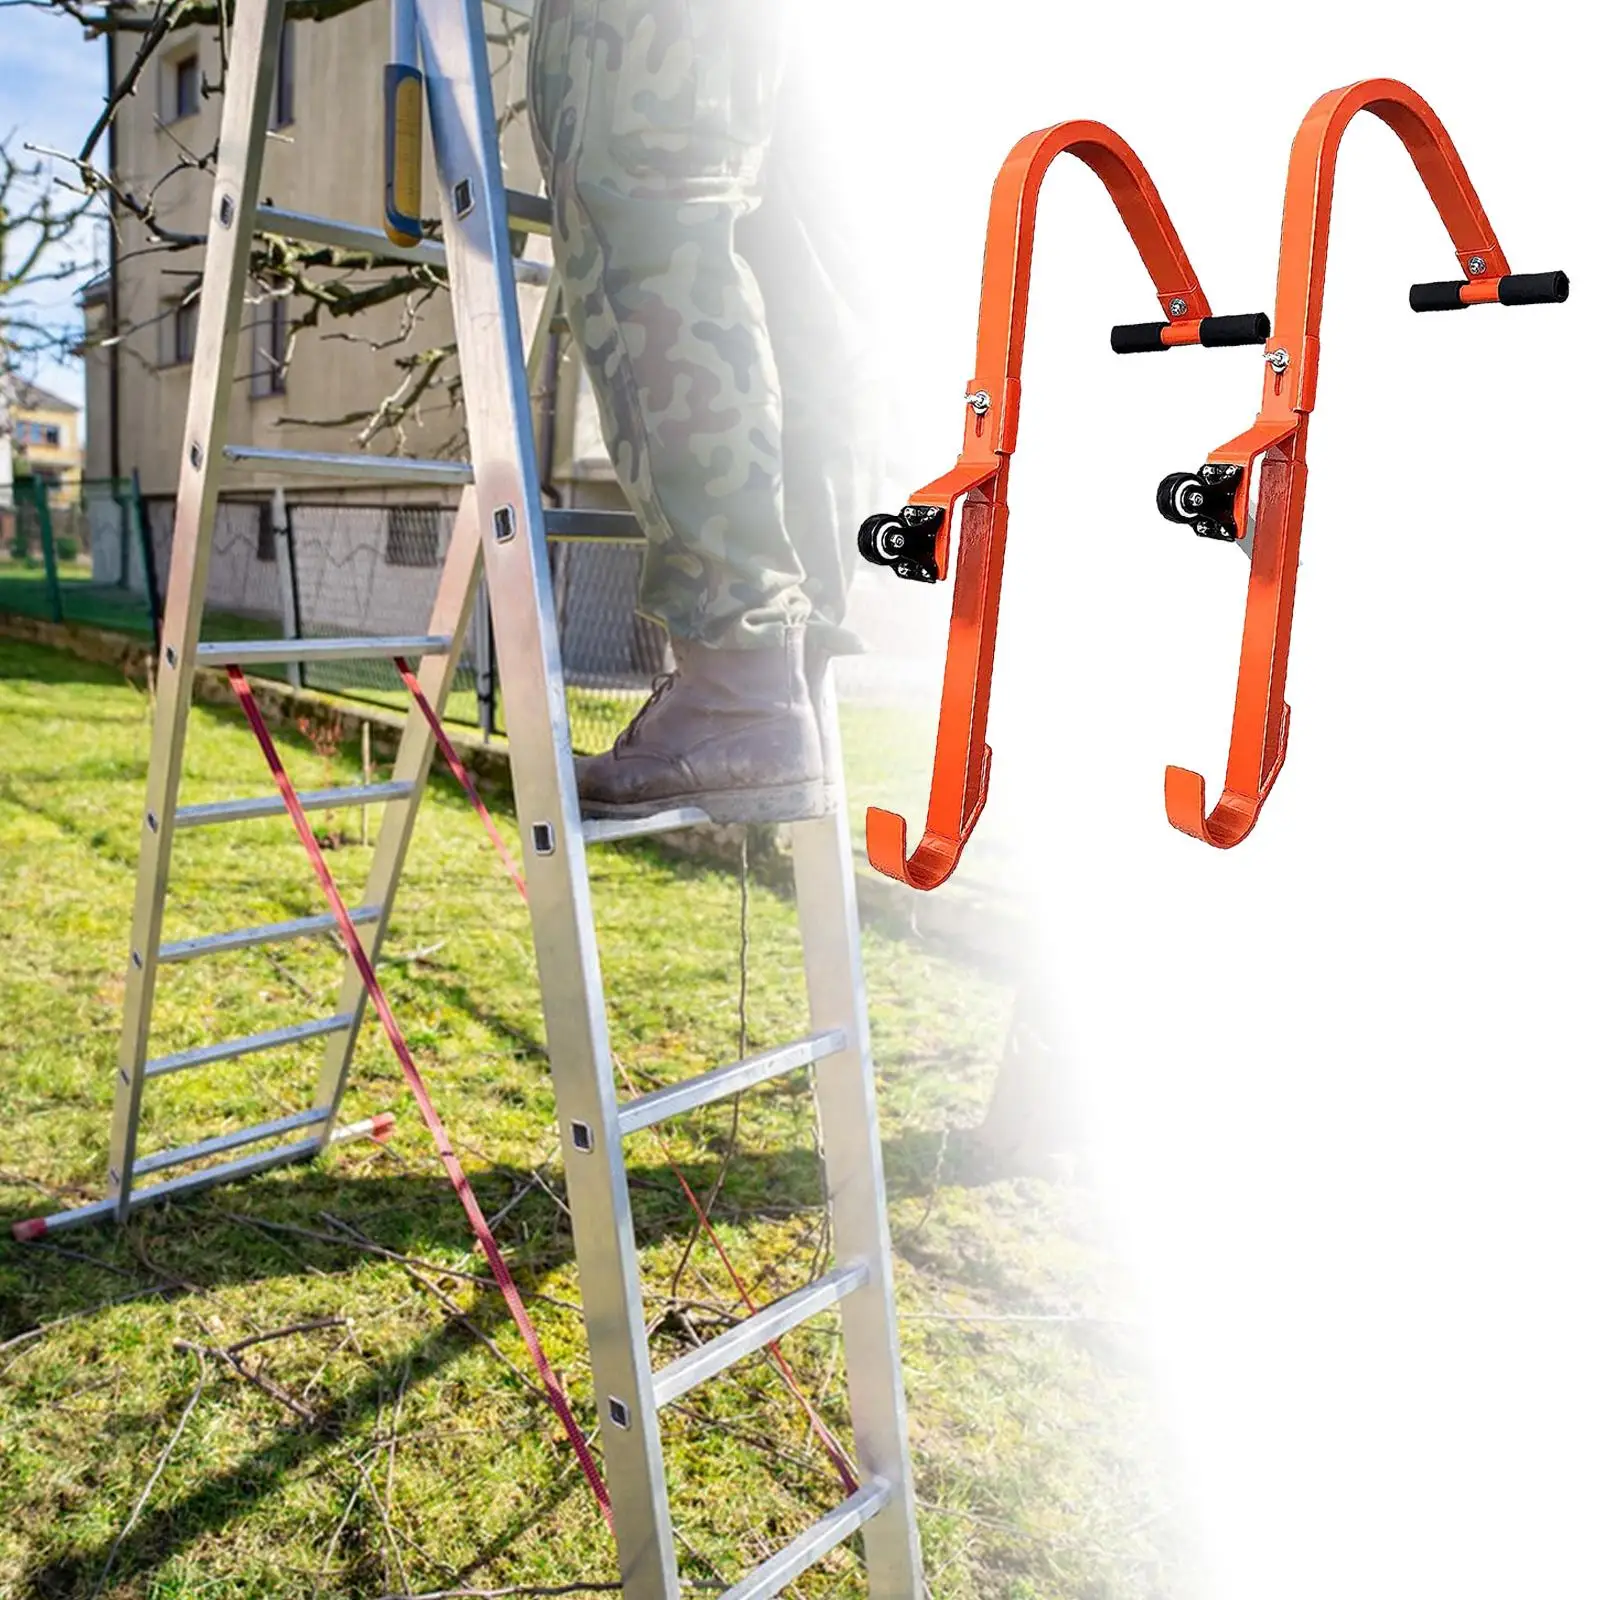 2x Roofing Ladder Hook Ladder Spare Parts Lightweight Iron with Wheel Roof Ladder Hook for Home Outdoor Projects Repair Gutter